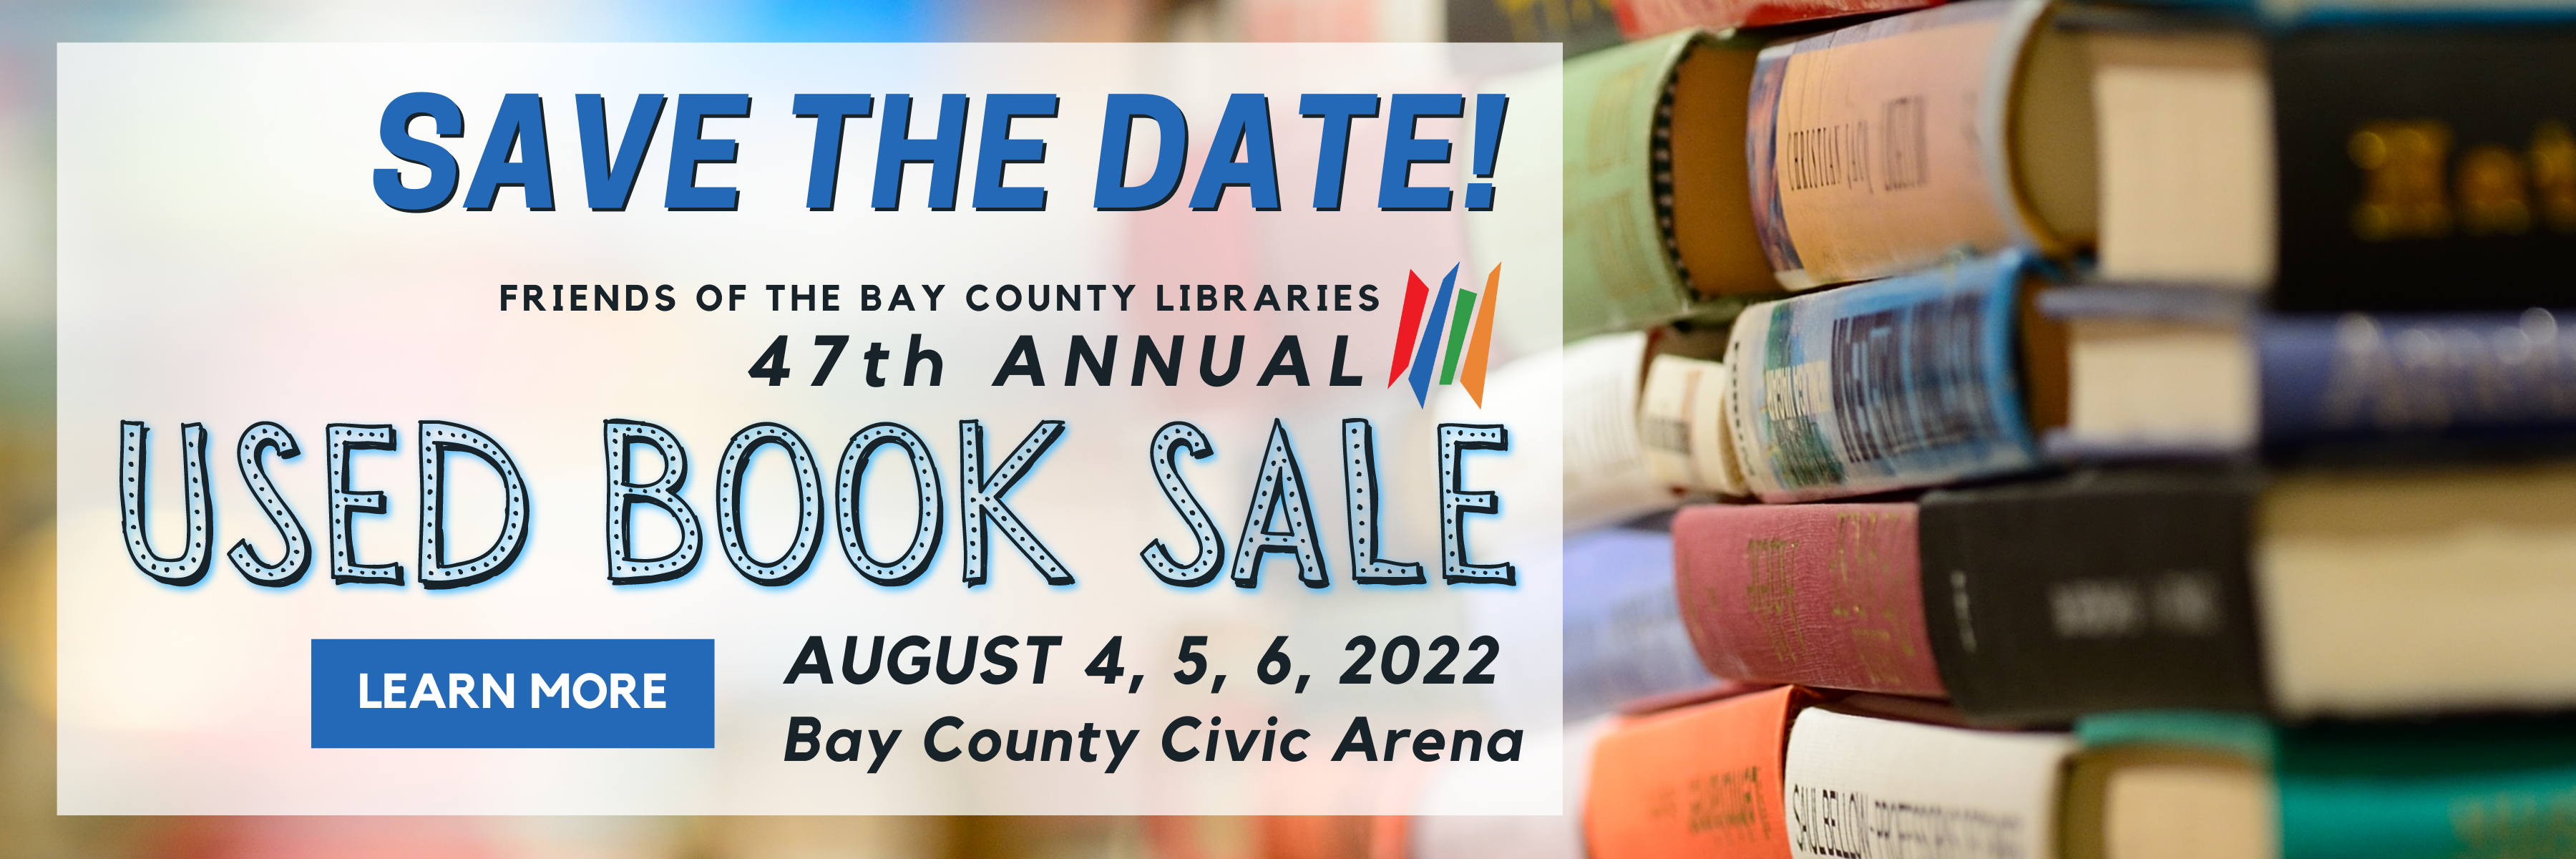 Used book sale August 4, 5 and 6 at Bay County Civic Arena